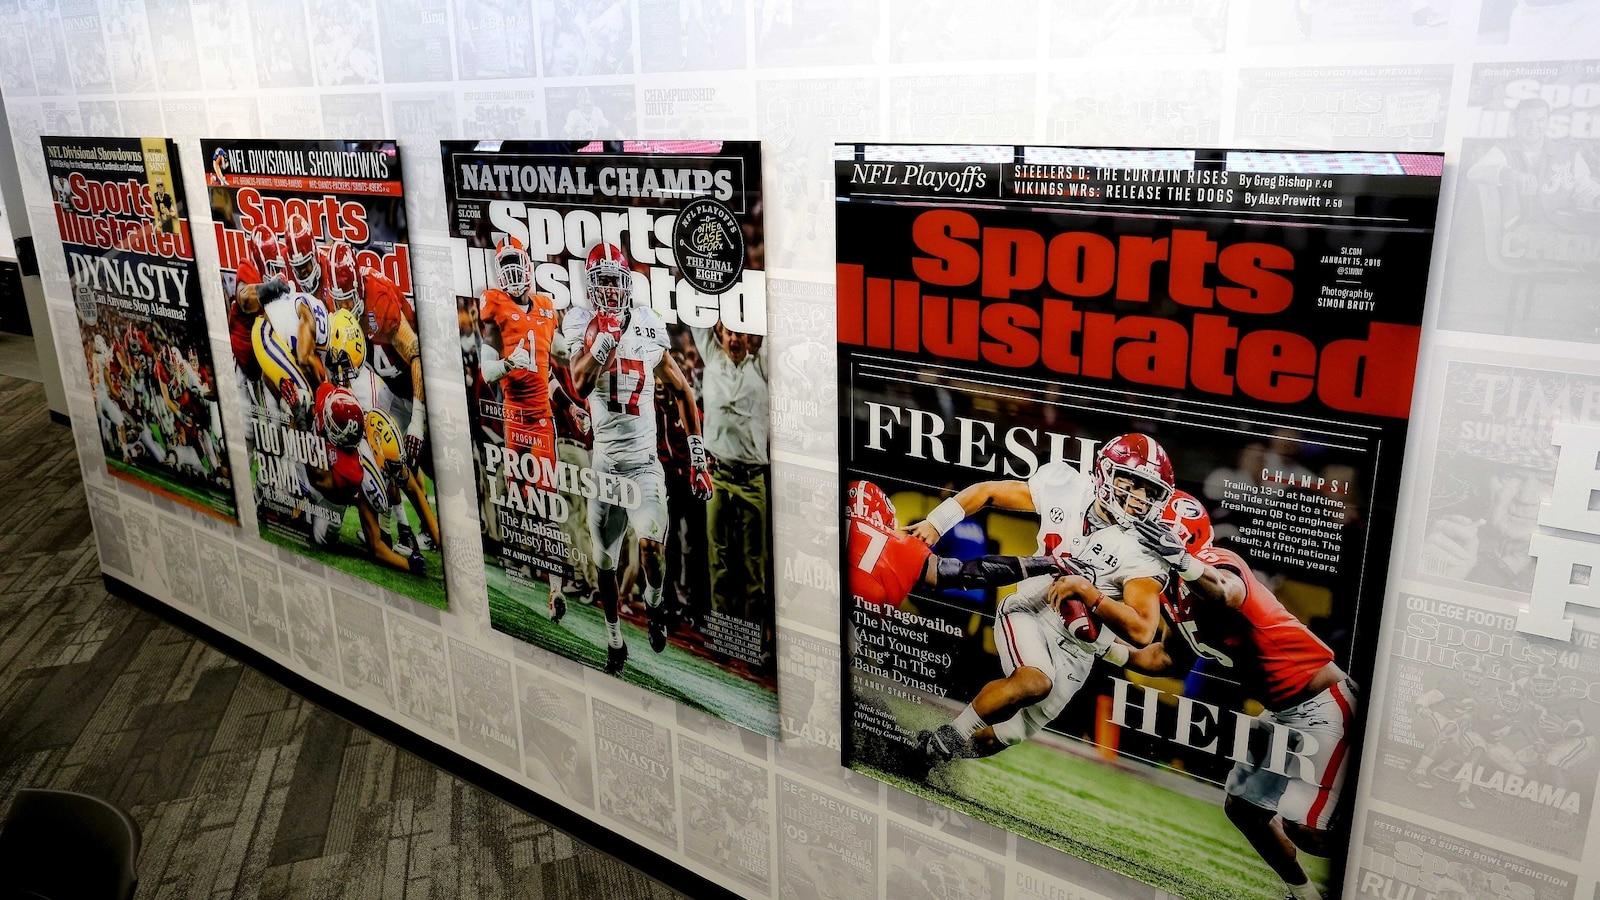 Sports Illustrated's Publisher Announces Mass Layoff, According to Union